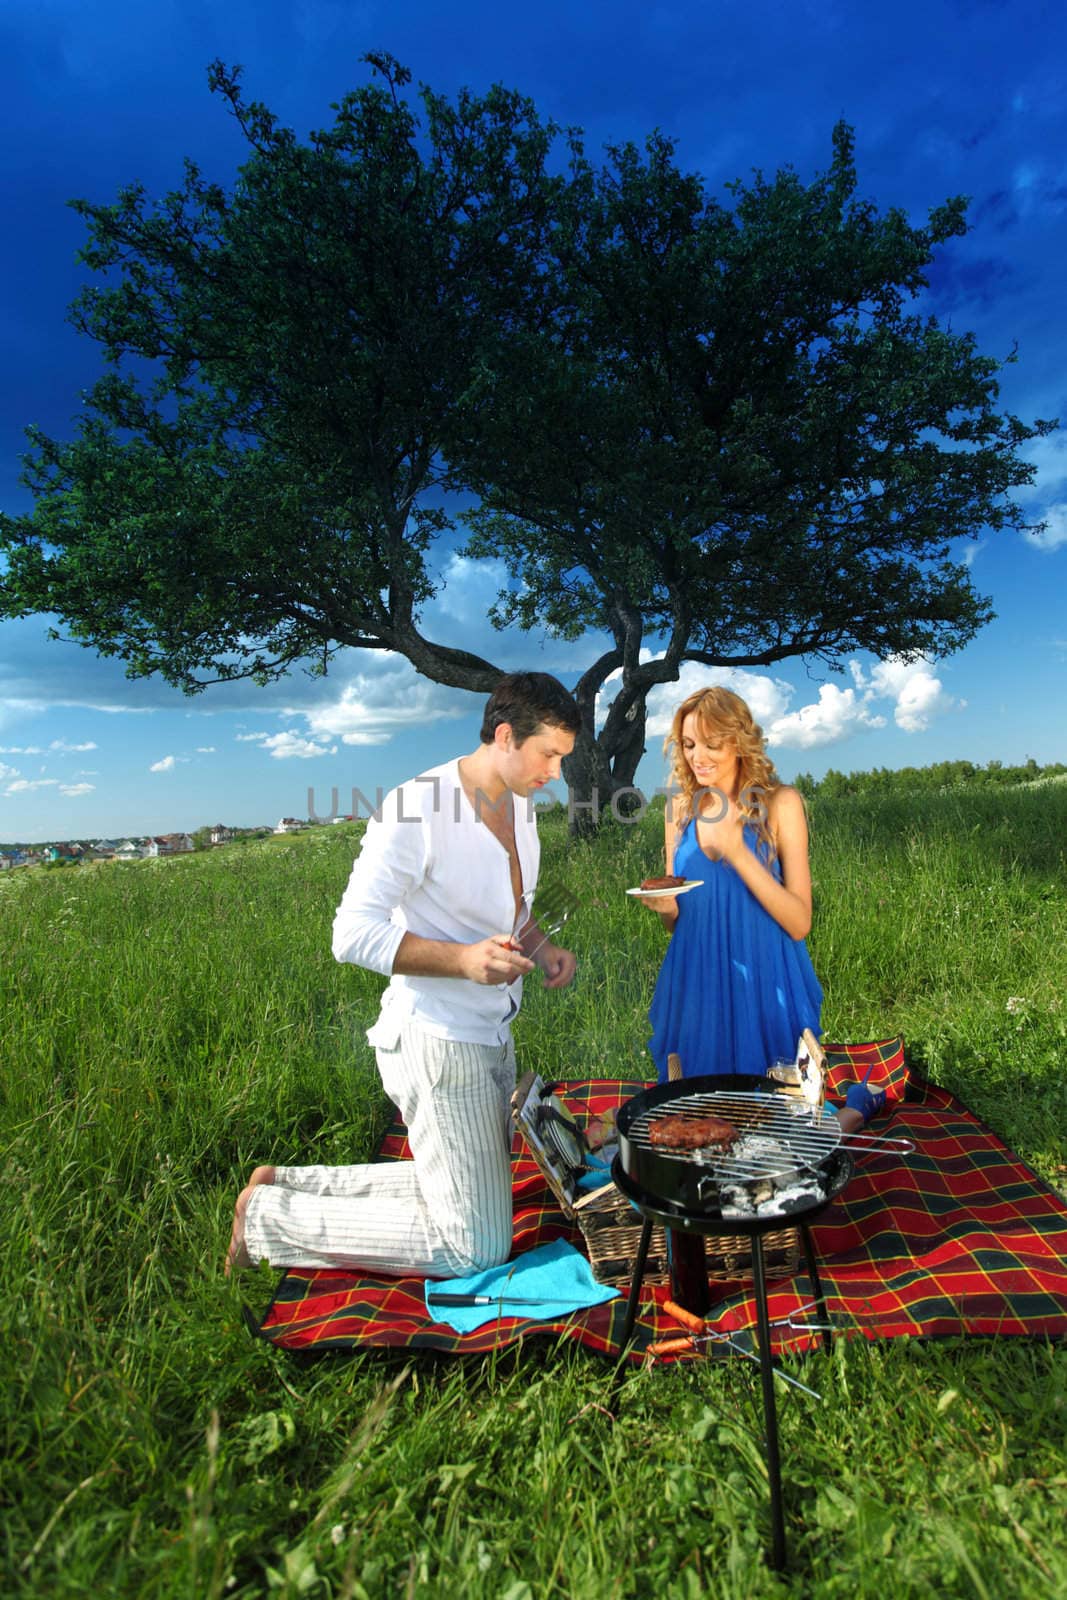 man and woman on picnic in green grass